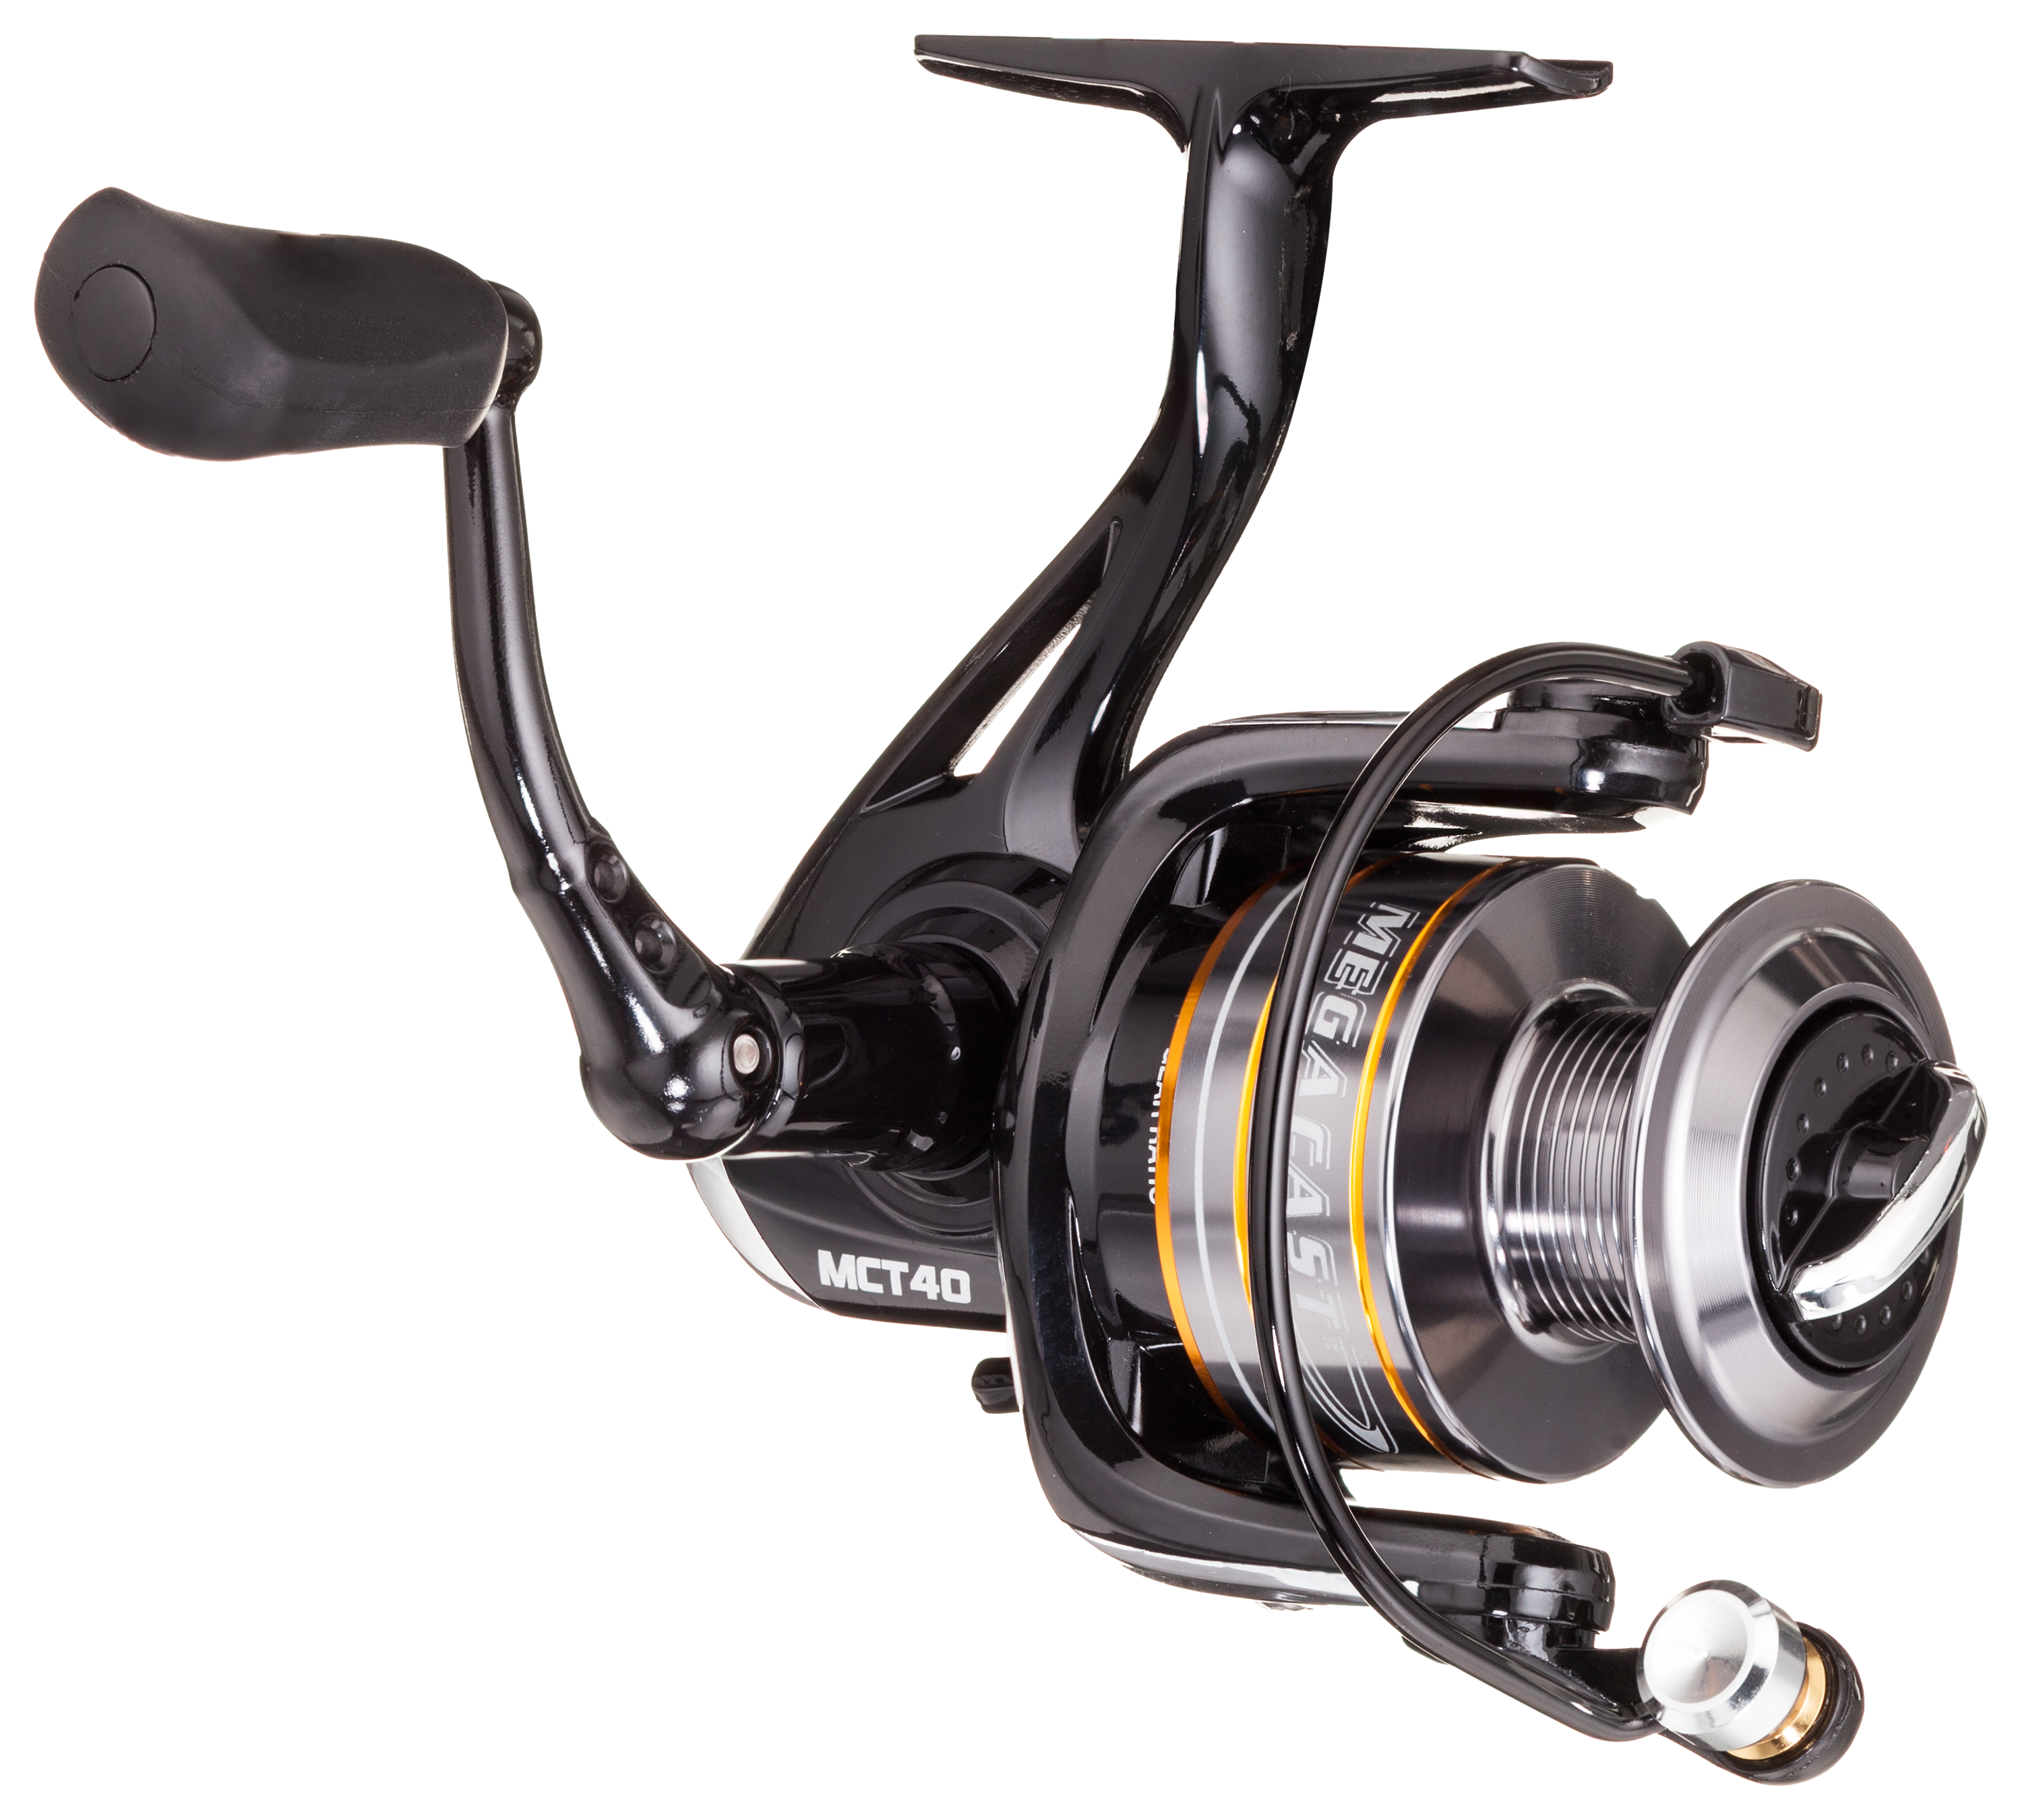 New Bass Pro Megacast 20 Reel, Includes 10 Lb Bass Pro Excel Fishing Line,  4 Bearing System 5.1:1 Gear Ratio, Includes Manual, 4L Auction